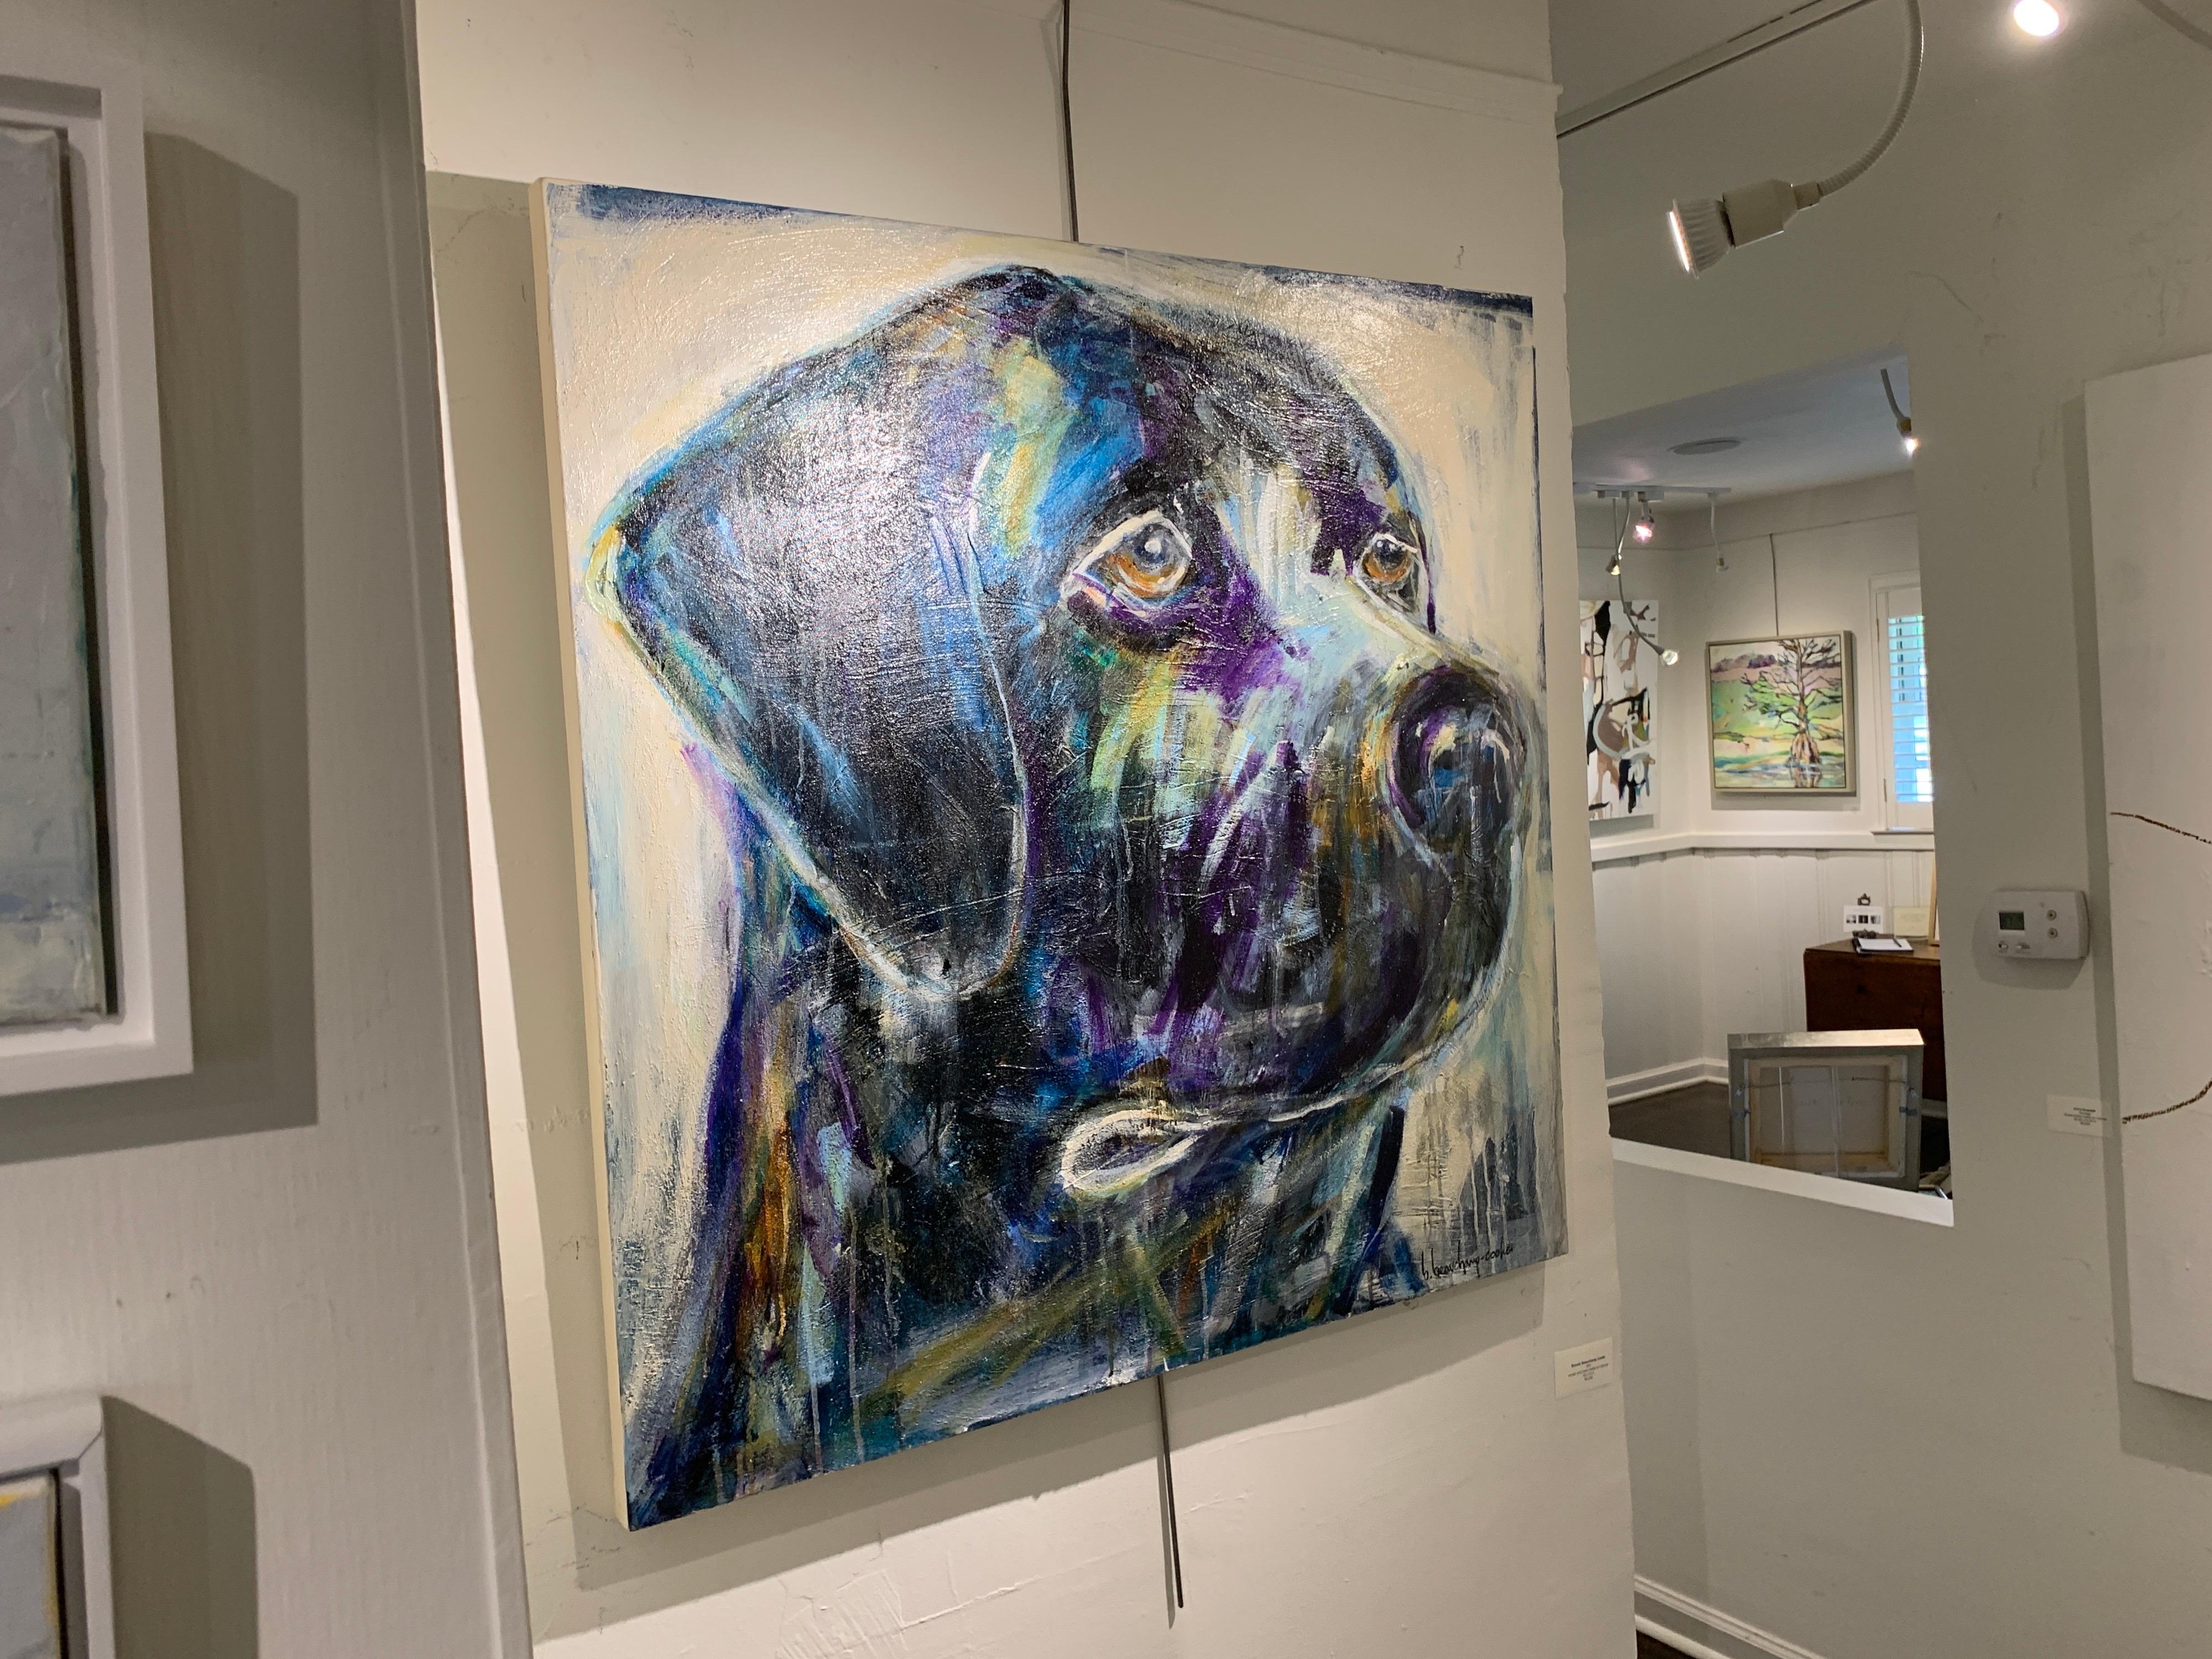 This mixed media on canvas animal painting by American artist and cowgirl Bonnie Beauchamp Cooke is entitled 'Ace and was created in 2021. The painting depicts a Retriever portrait from the side. The subject is so close to us, that we feel like we